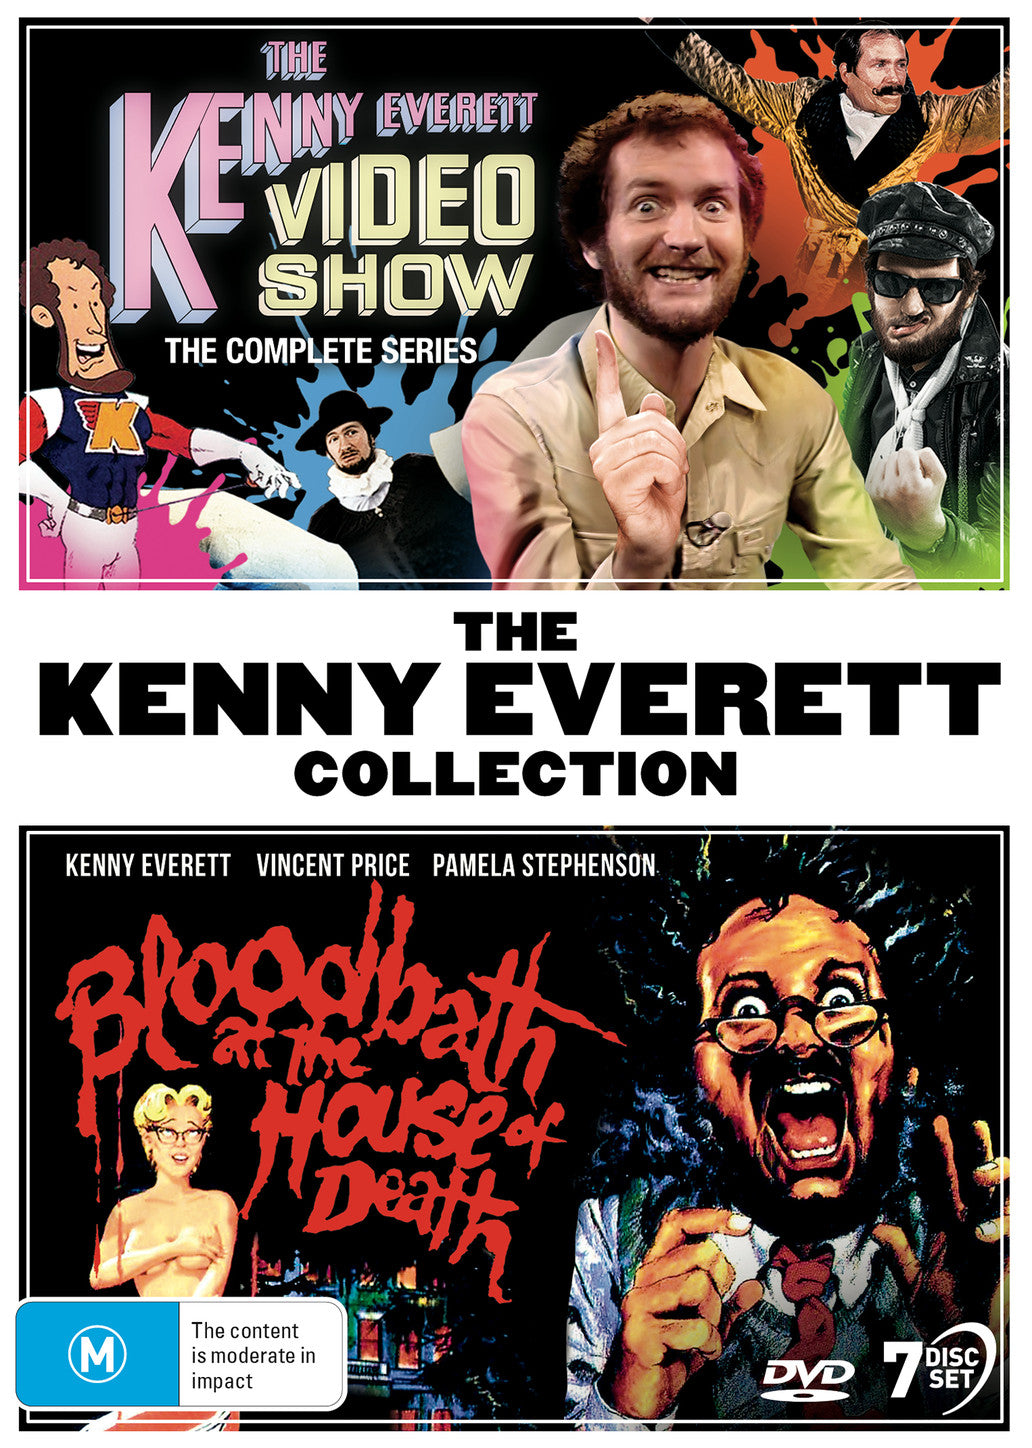 THE KENNY EVERETT COLLECTION: THE KENNY EVERETT VIDEO SHOW & BLOODBATH AT THE HOUSE OF DEATH